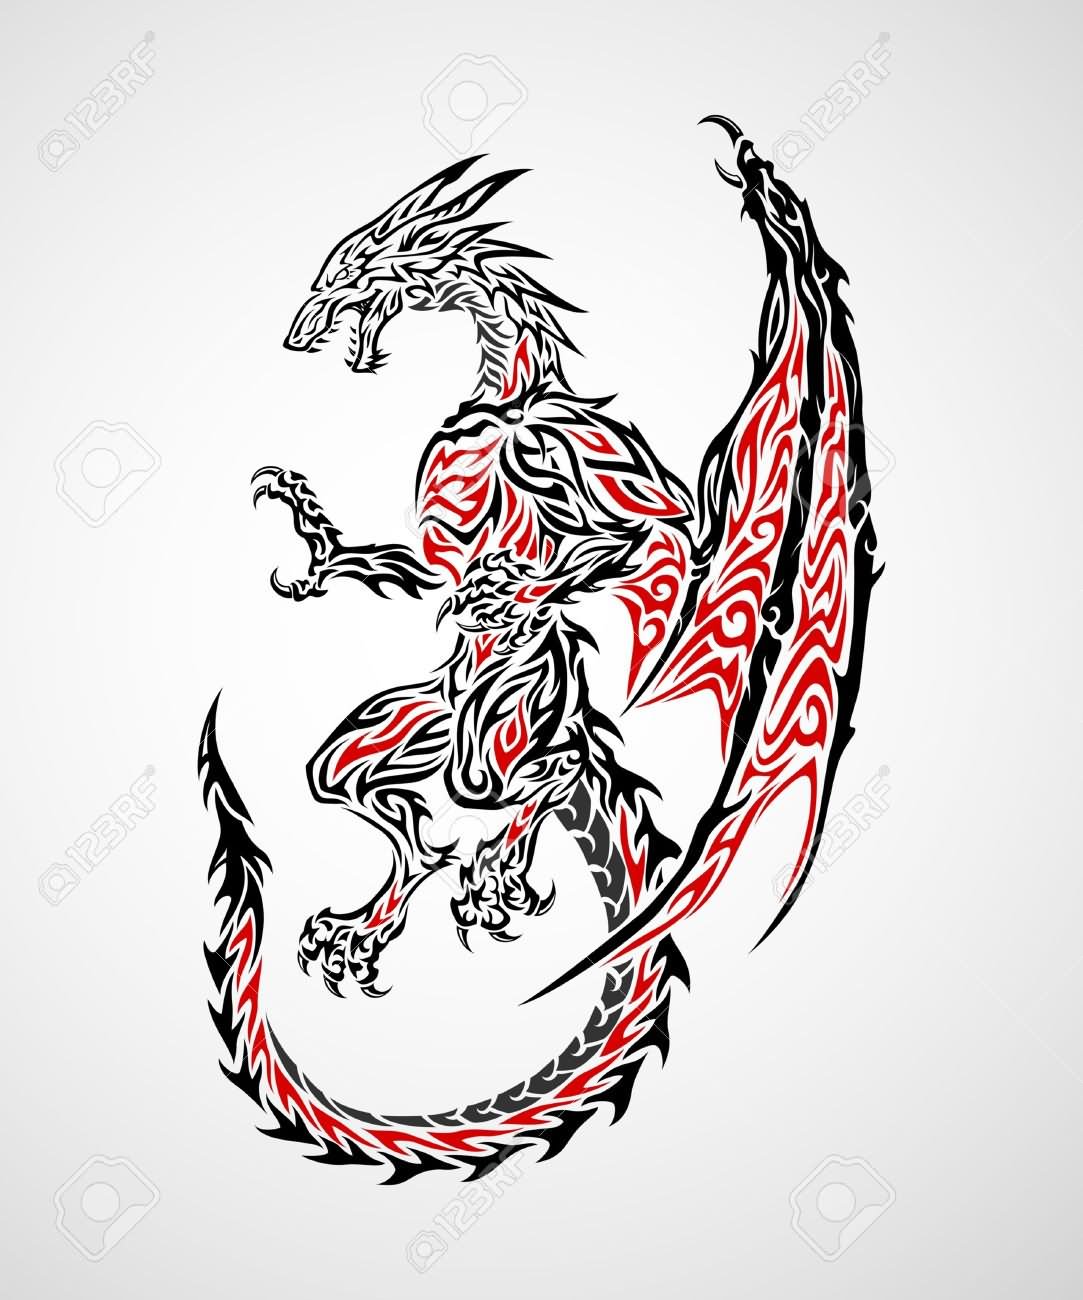 Black And Red Tribal Gothic Dragon Tattoo Stencil